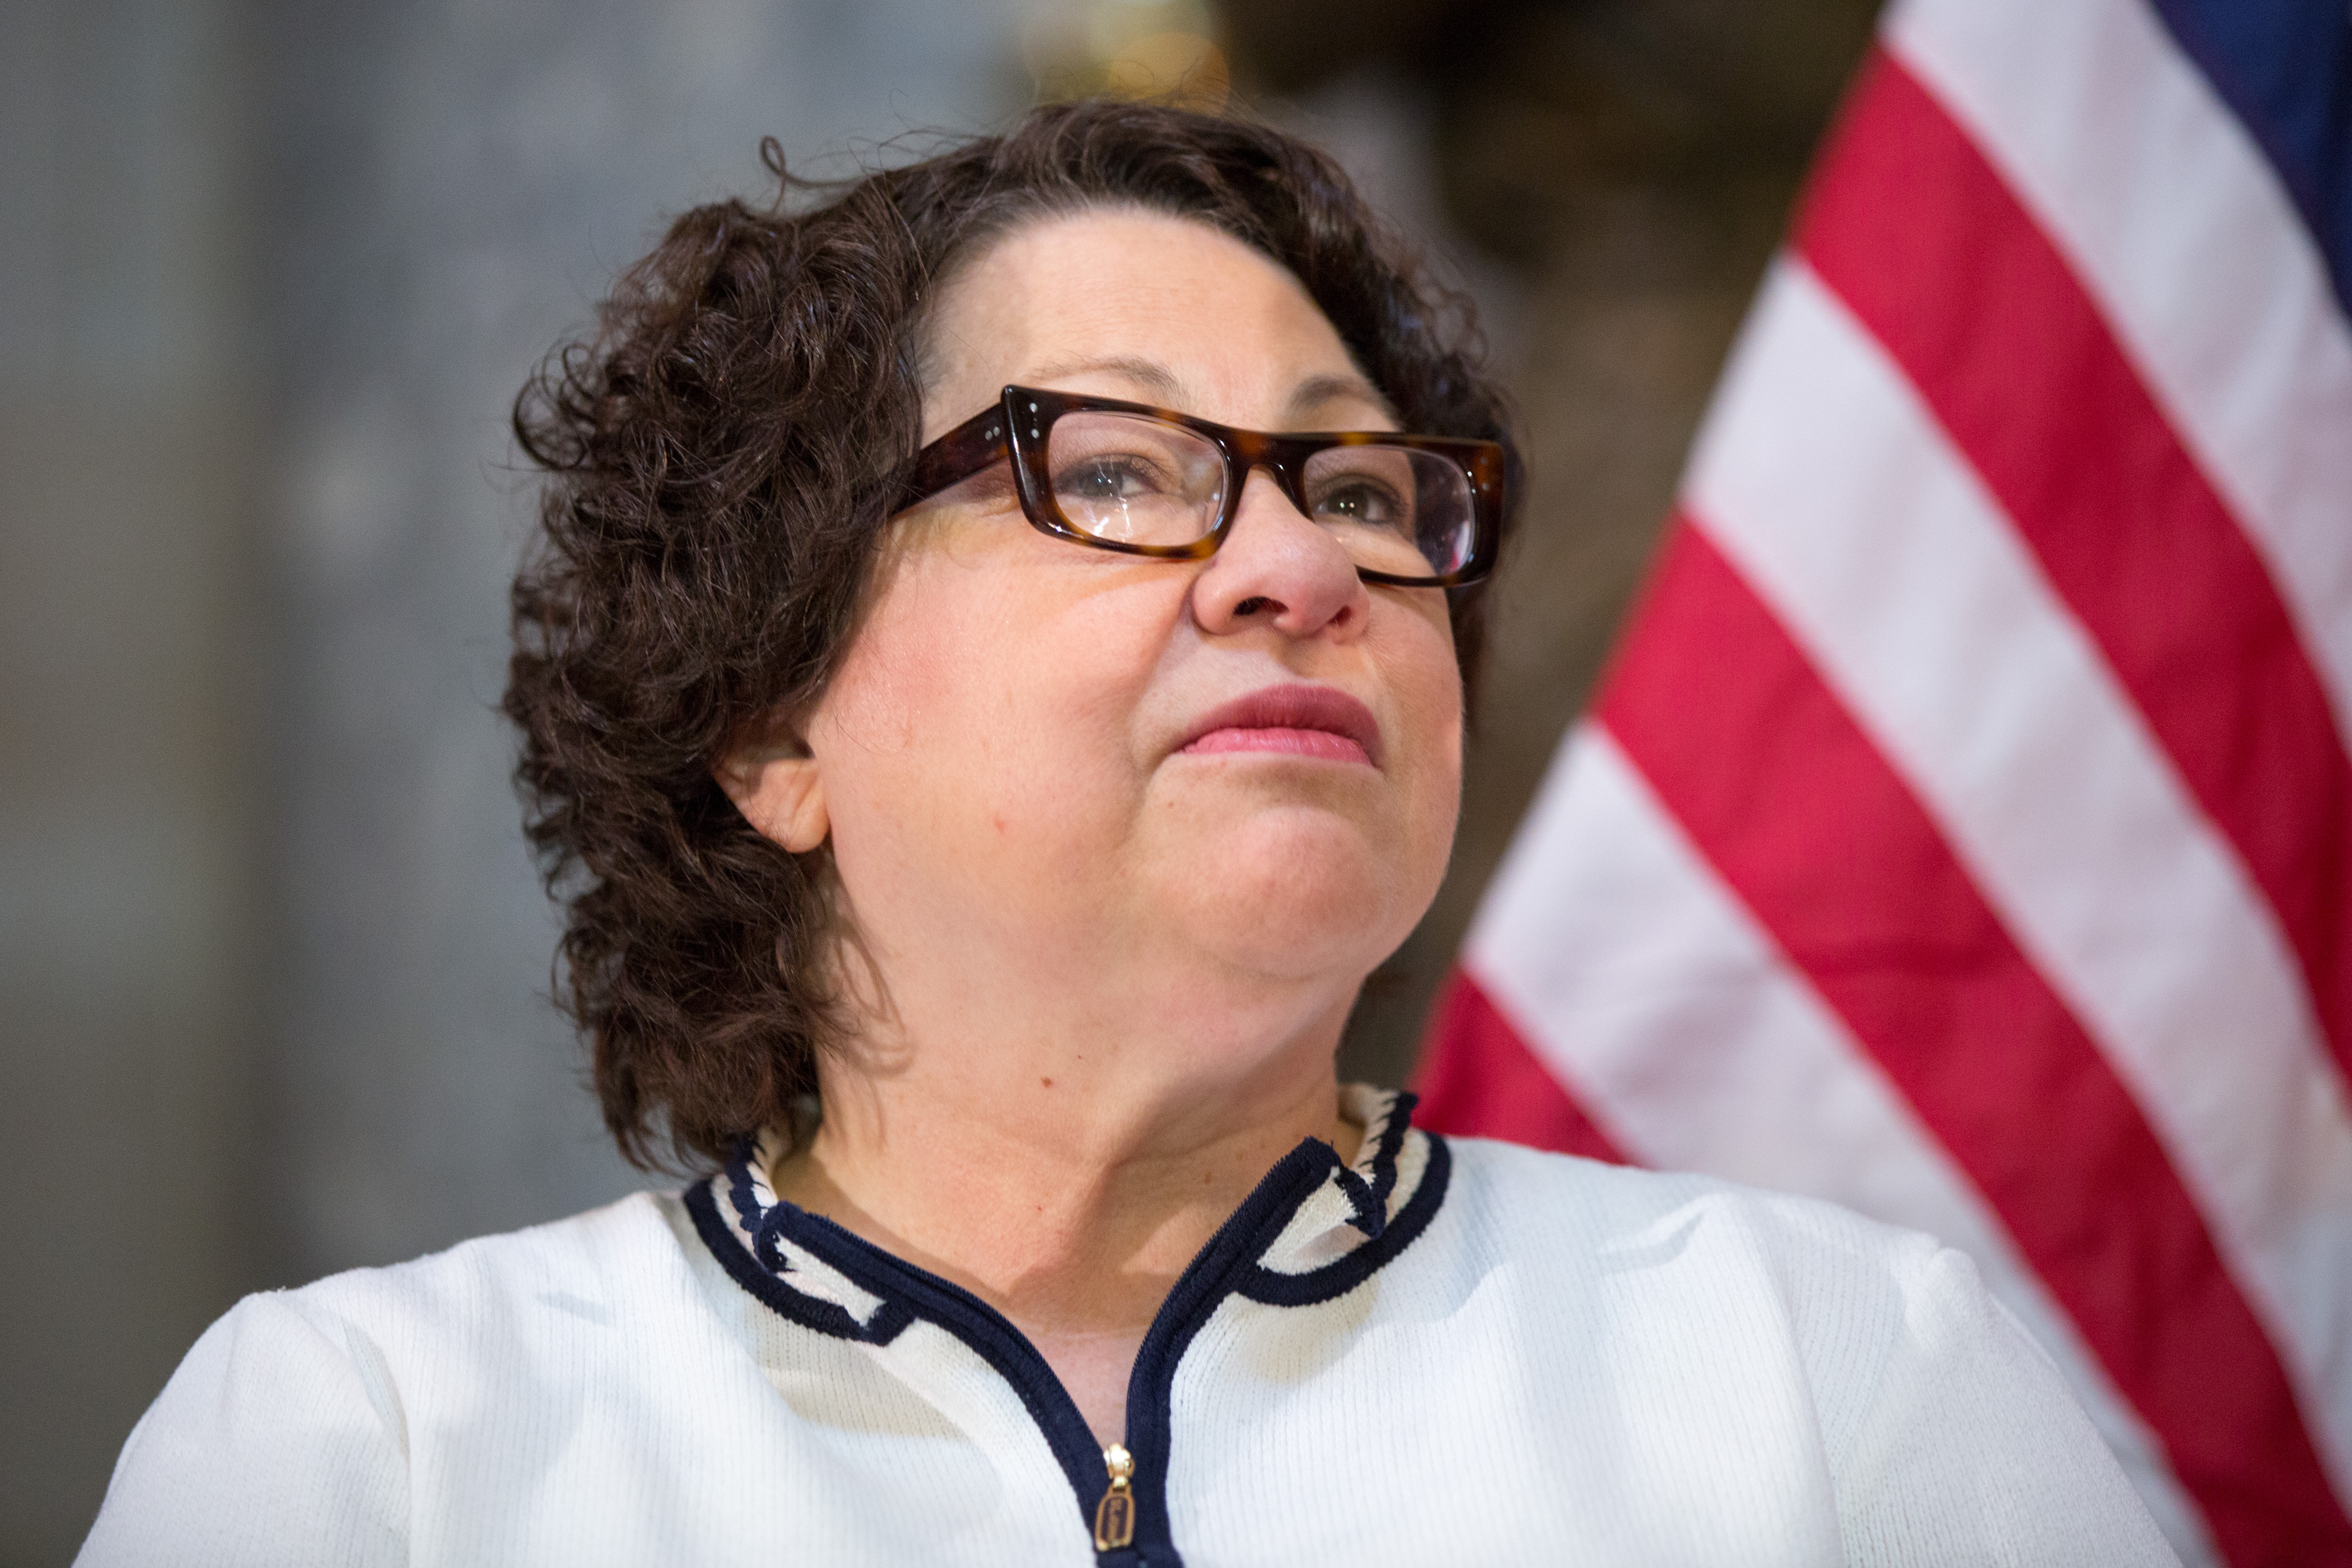 U.S. Supreme Court Justice Sonia Sotomayor participates in an annual Women's History Month reception in the U.S. capitol building on Capitol Hill in Washington, D.C. (Allison Shelley/Getty Images)